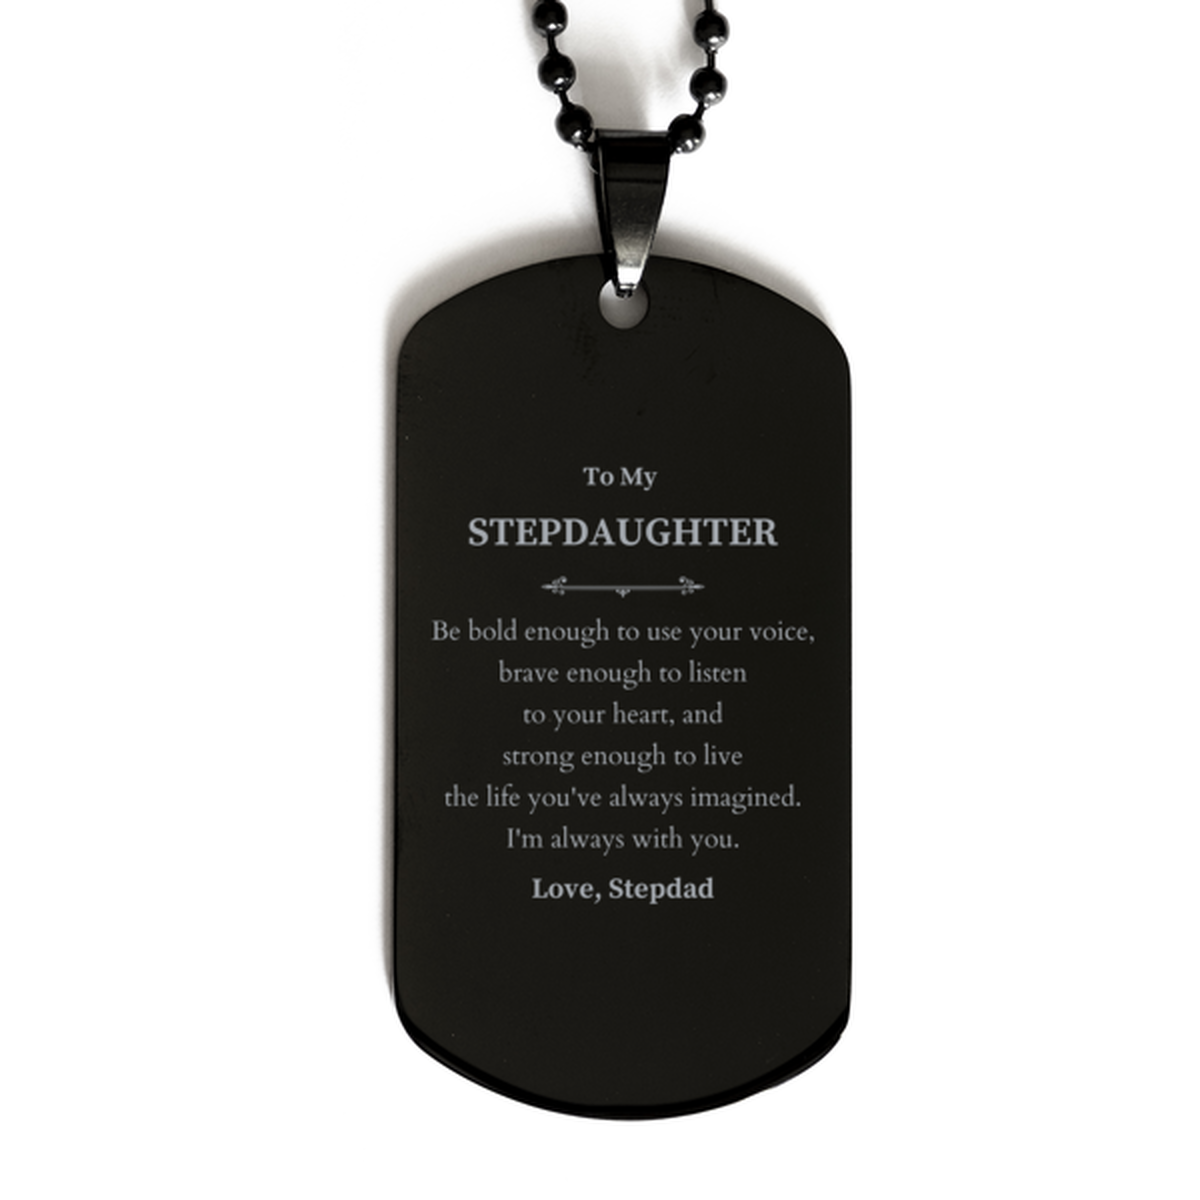 Keepsake Stepdaughter Black Dog Tag Gift Idea Graduation Christmas Birthday Stepdaughter from Stepdad, Stepdaughter Be bold enough to use your voice, brave enough to listen to your heart. Love, Stepdad